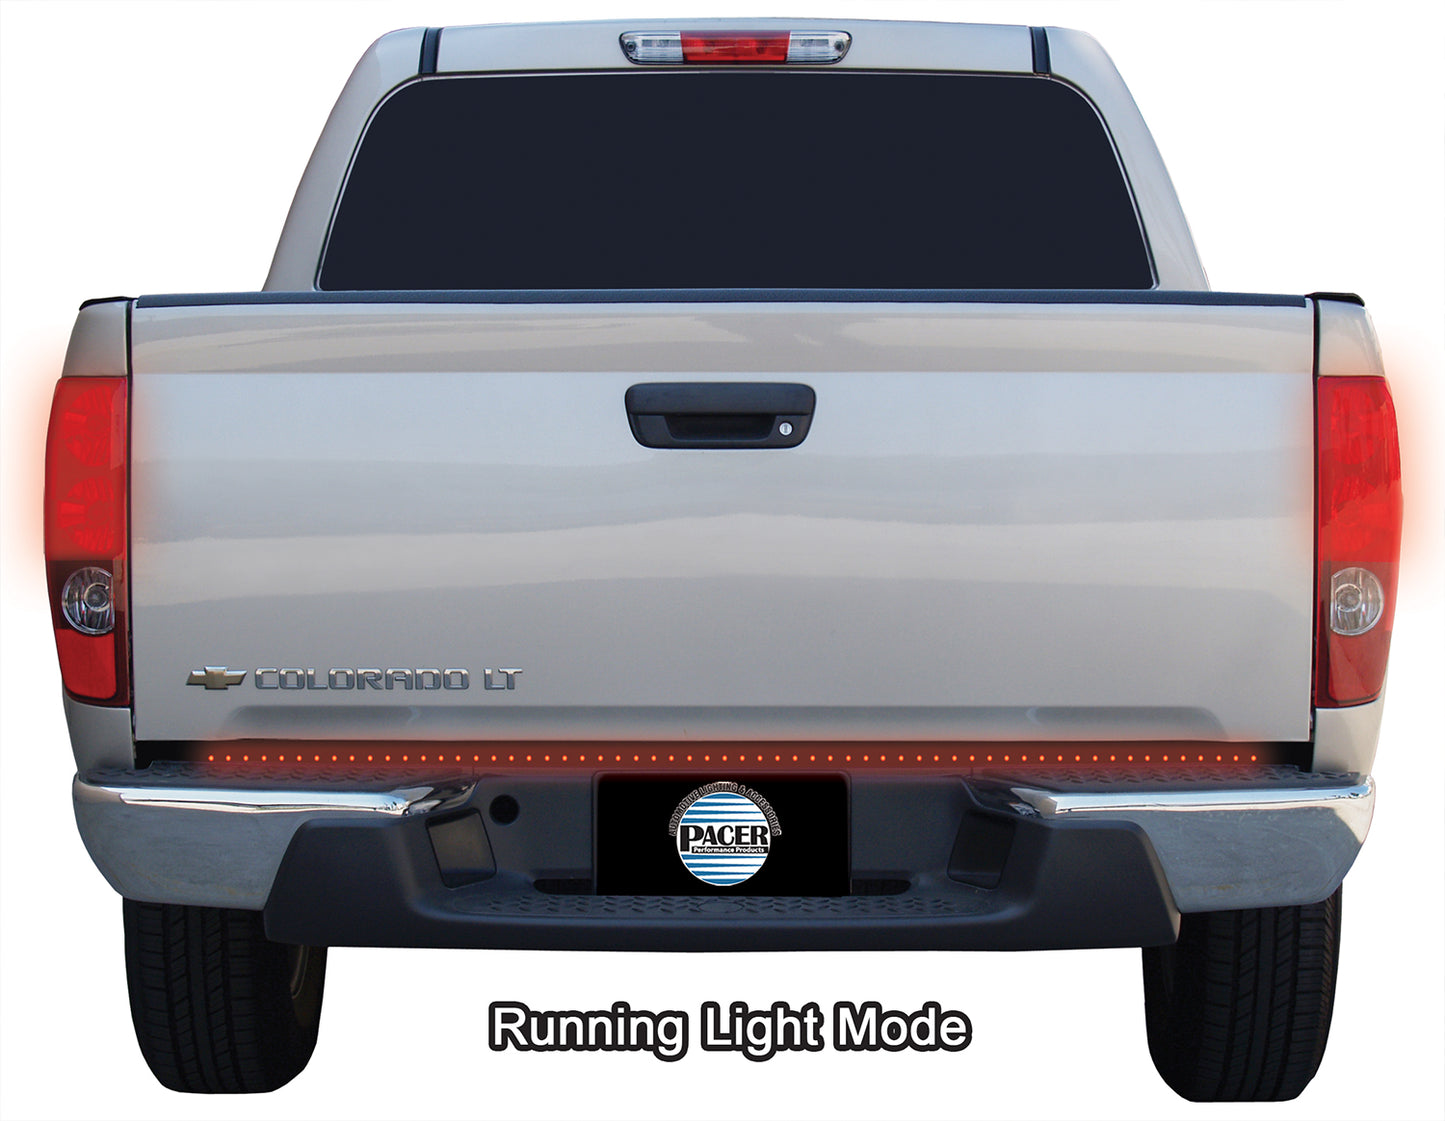 Pacer Performance - 20-800 - Tailgate Light -  20-800 Outback F4 4 Function Red LED Tailgate Bar 49" - P/N: 20-800